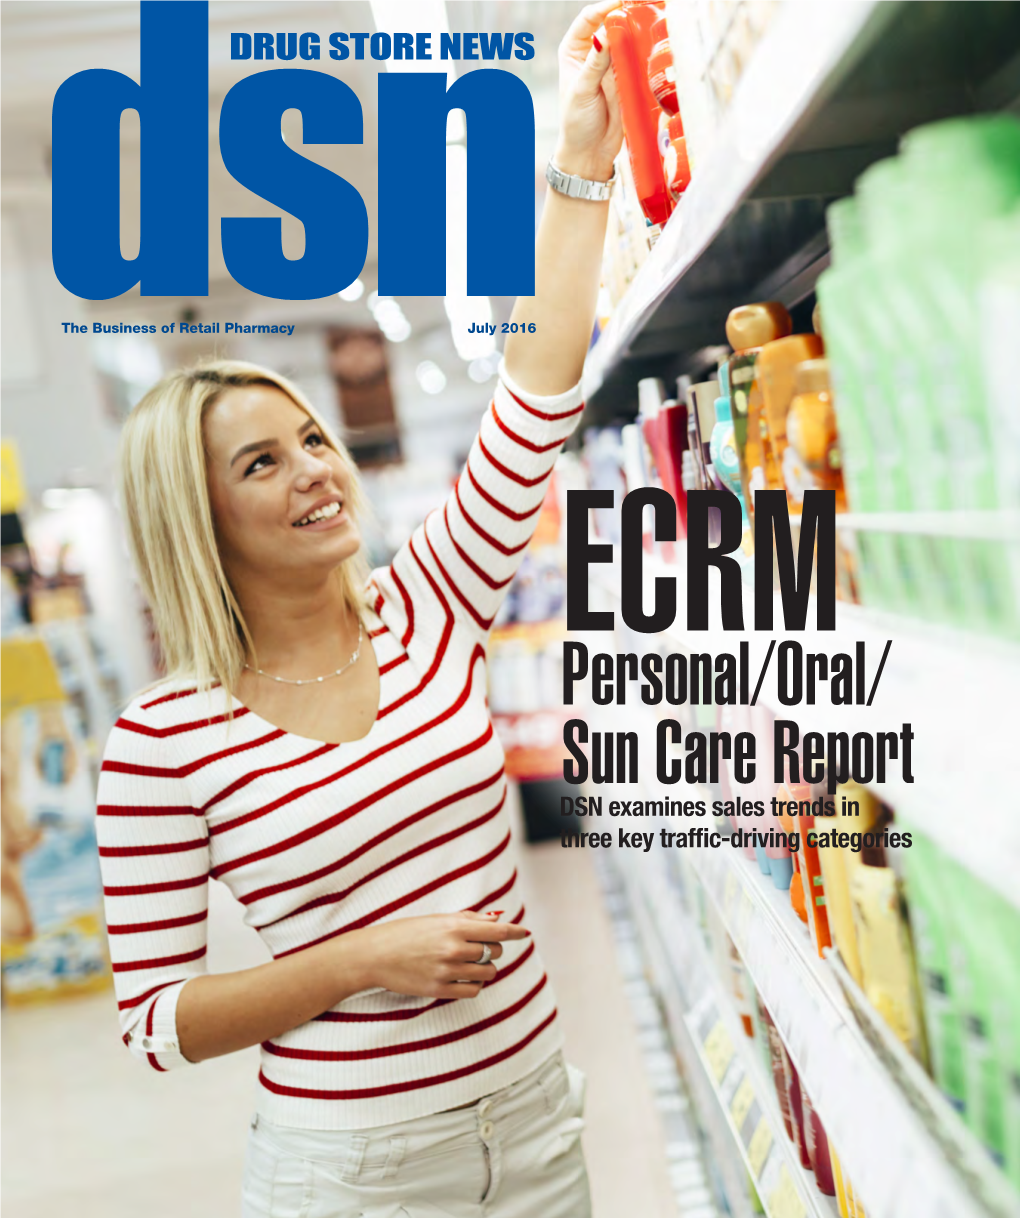 Personal/Oral/ Sun Care Report DSN Examines Sales Trends in Three Key Traffic-Driving Categories ECRMREPORT SUN CARE